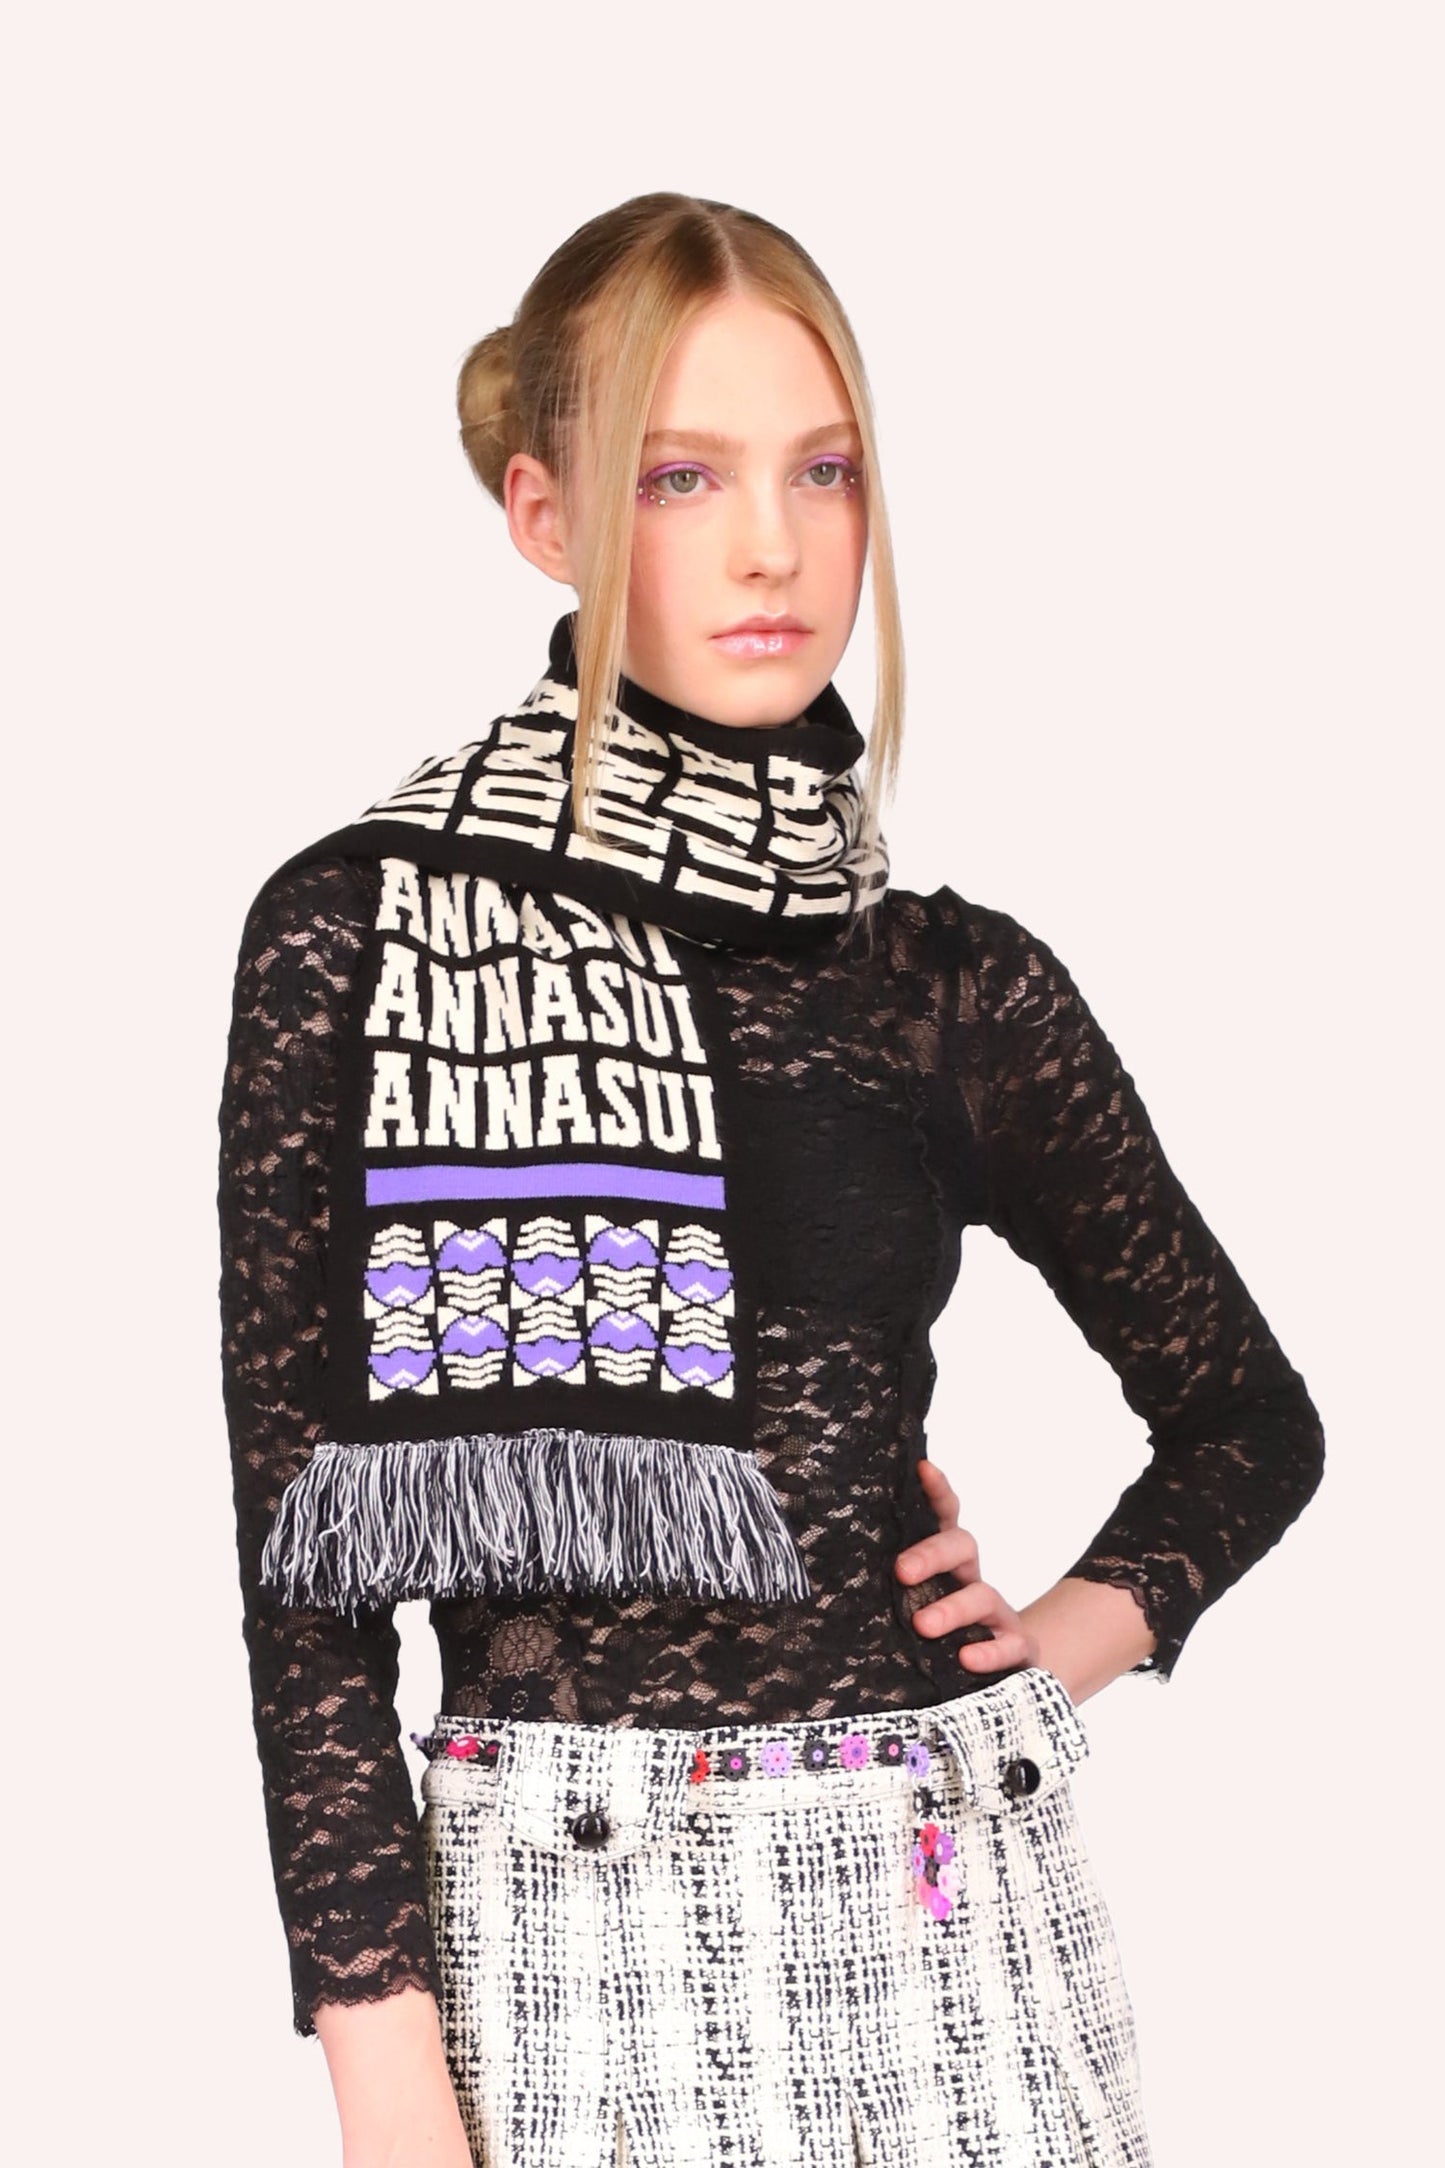 Pattern Anna Sui label, with purple fringes, a stylized egg design under, a purple line on both ends